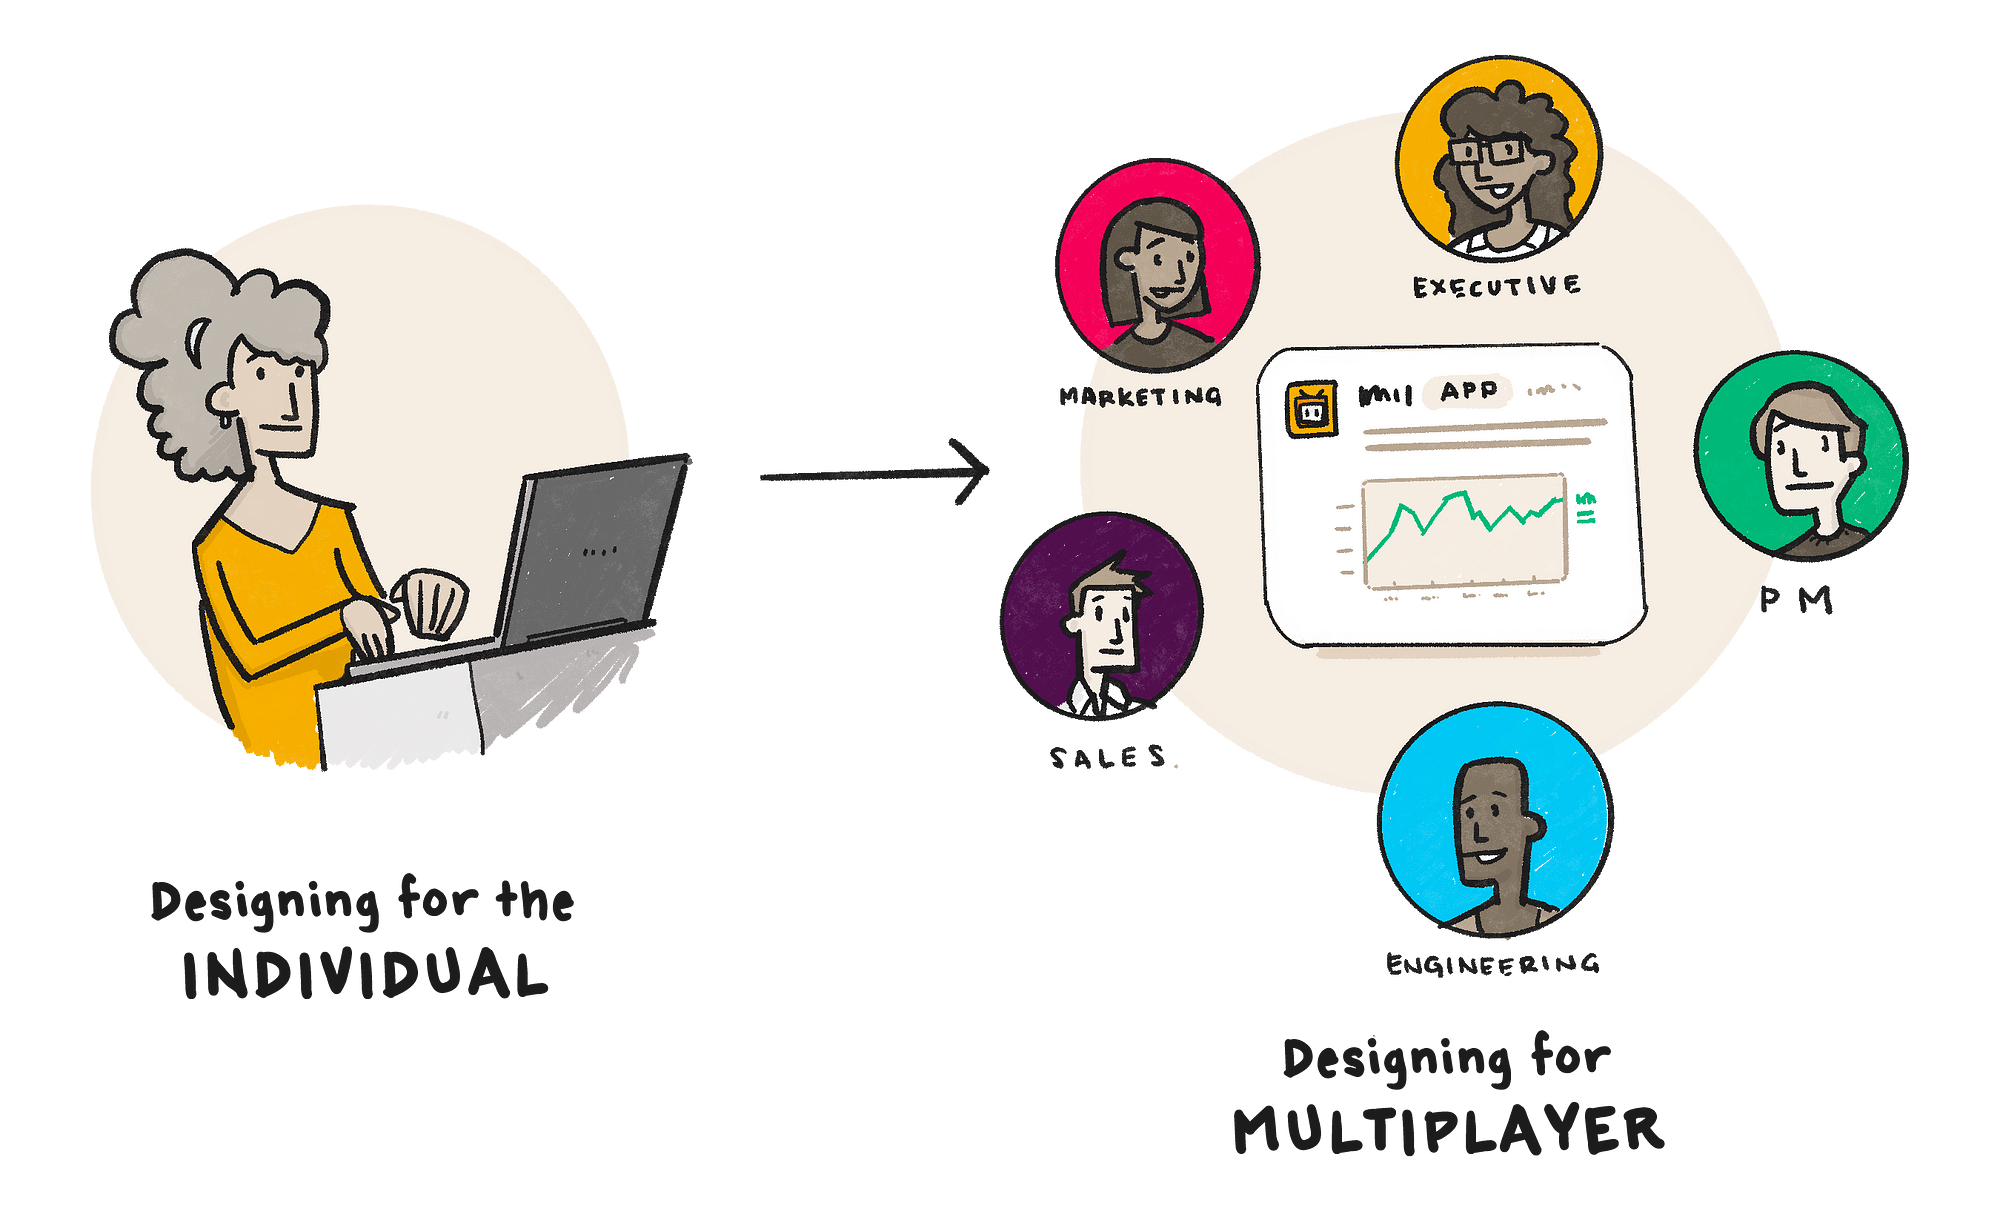 Illustration showing designing for an individual mindset (a woman working alone on her laptop) to designing for multiplayer mindset (many members of a team collaborating around a data visualization in Slack)